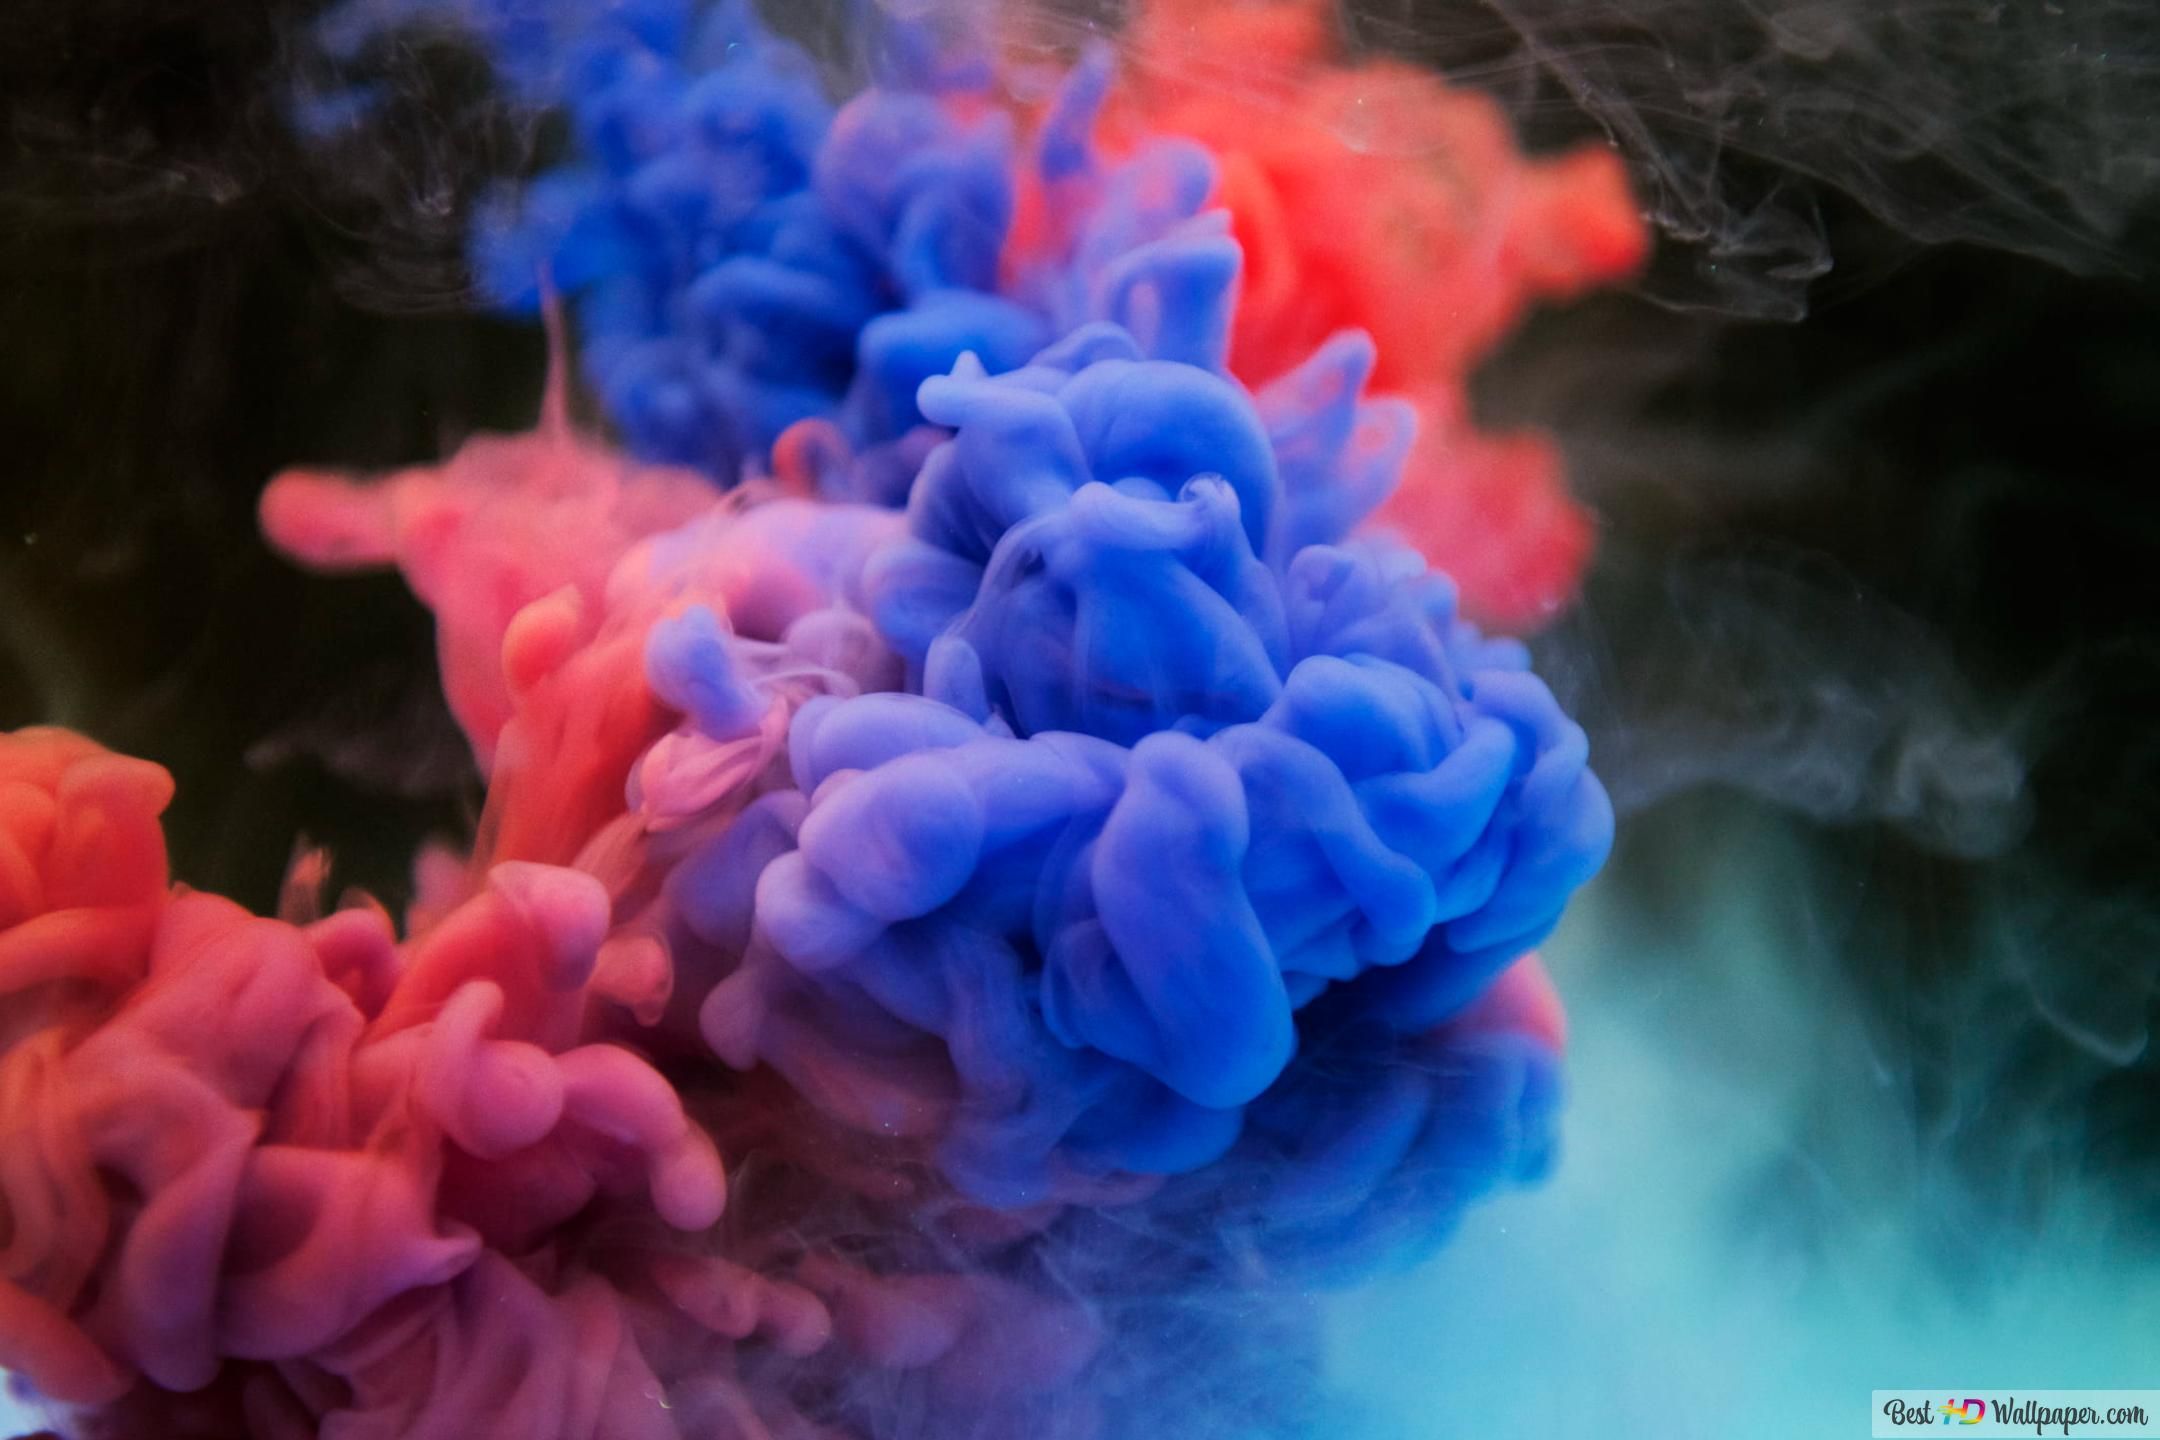 A close up of two blue and red liquids - Smoke